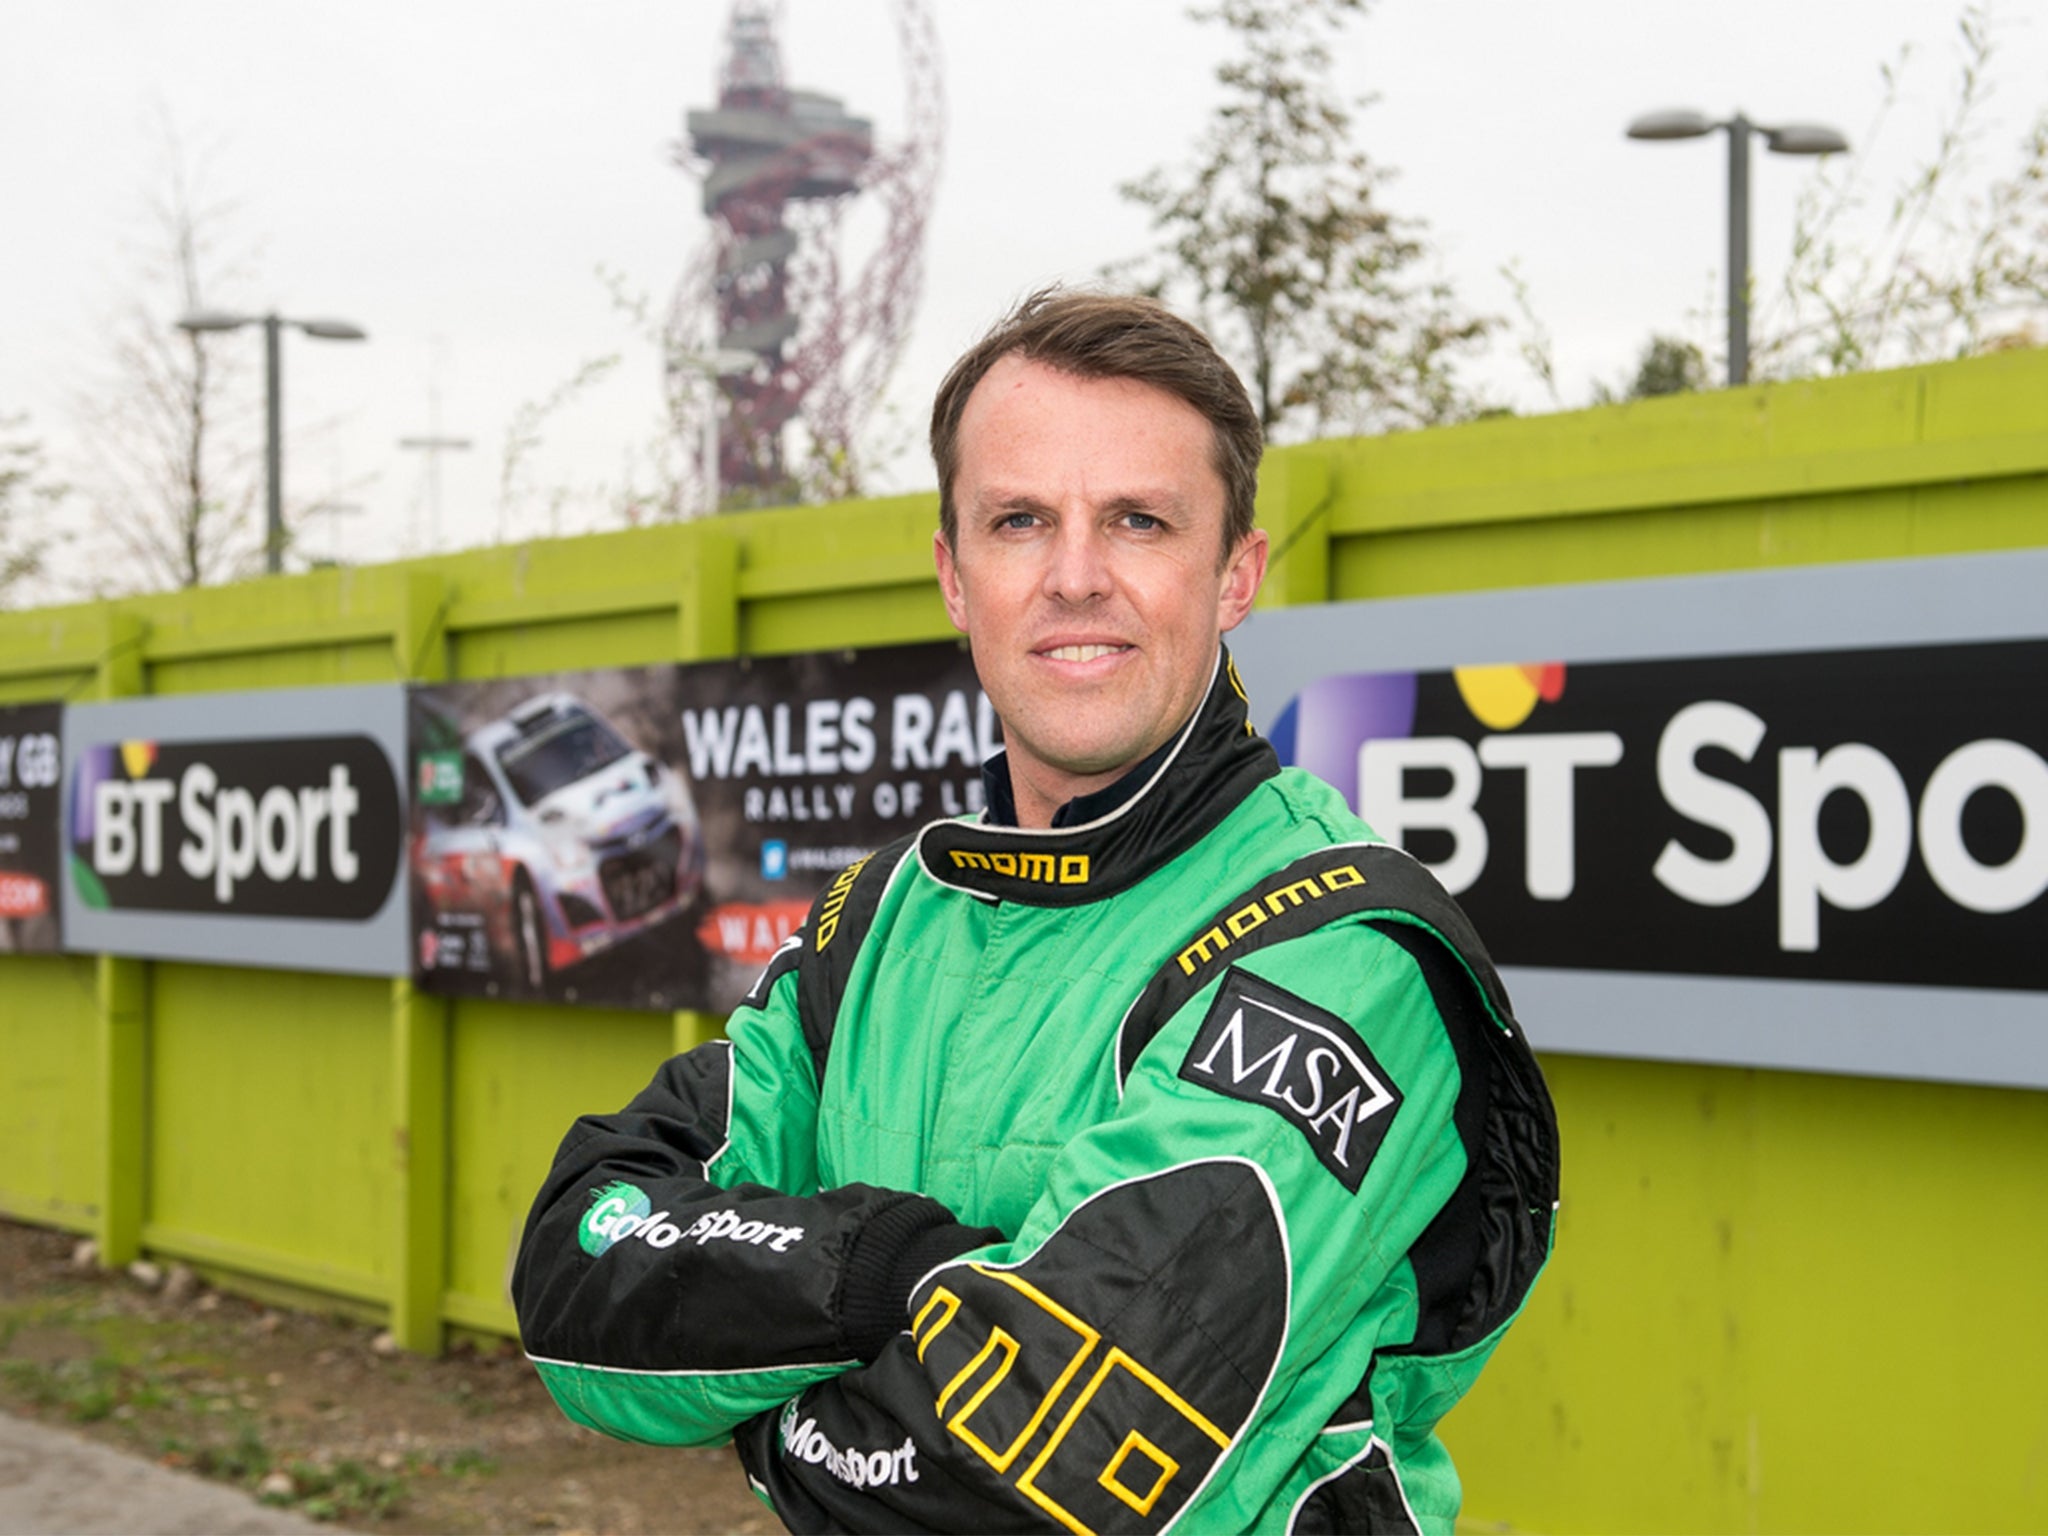 Swann at the Wales Rally GB event